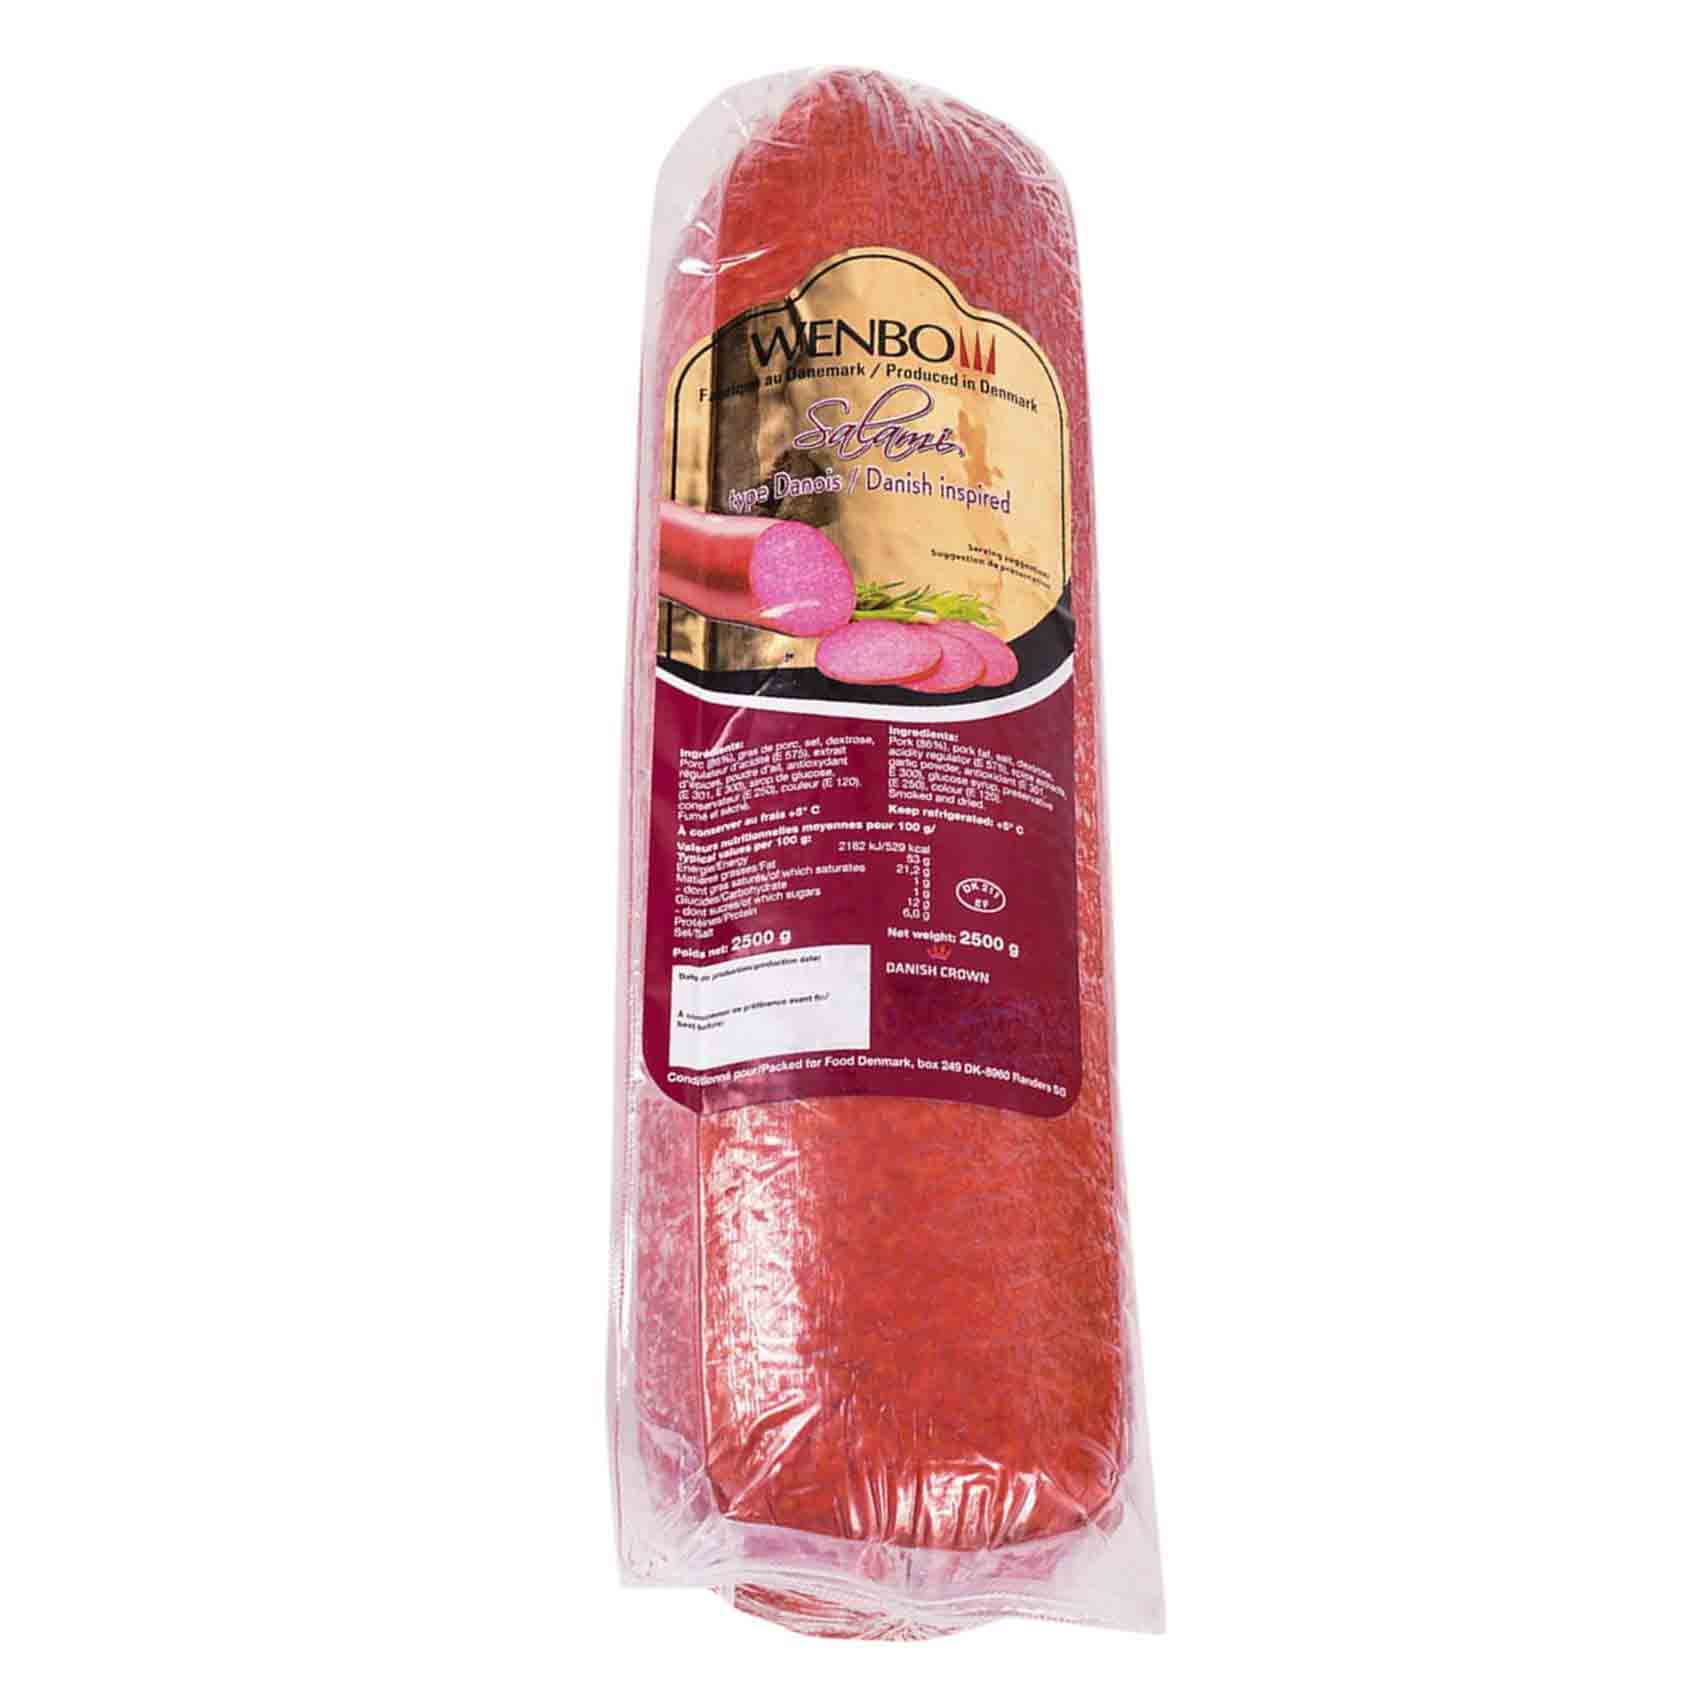 Wenbo French Style Salami 2.5kg